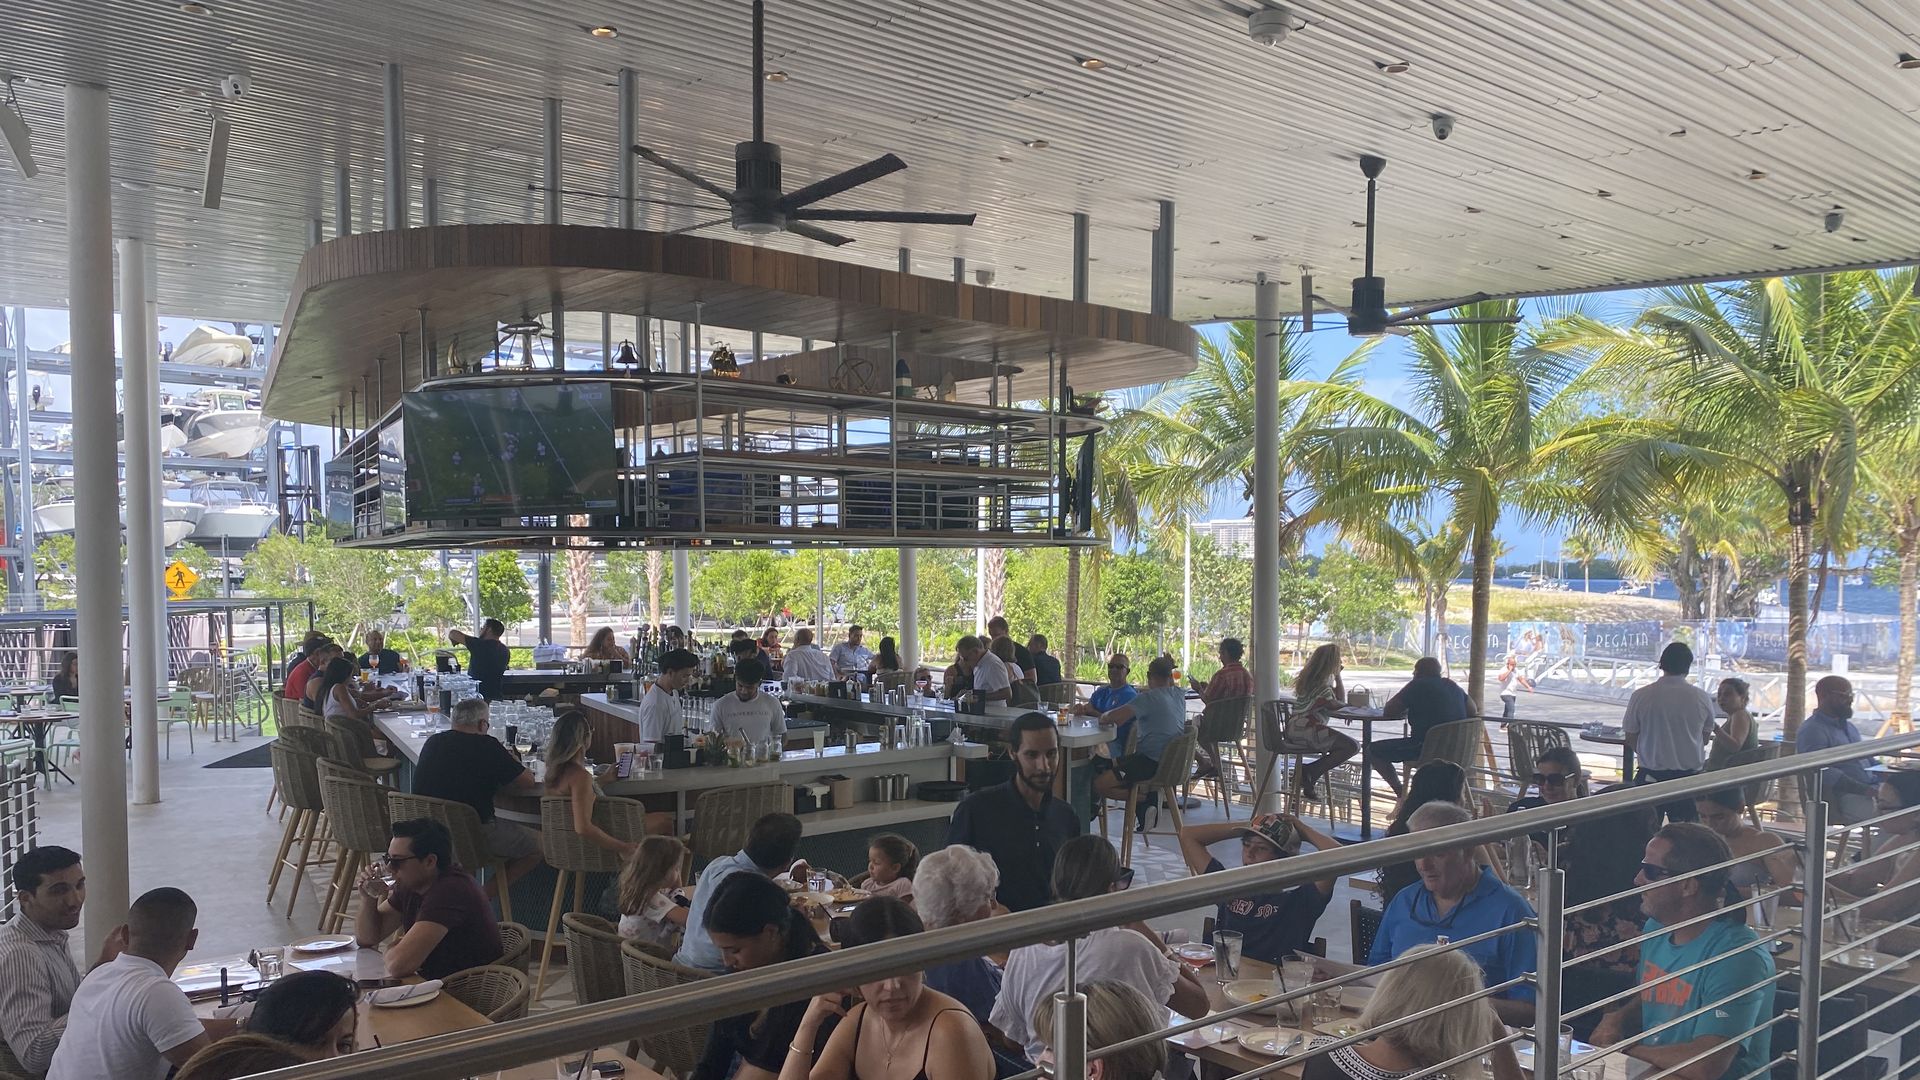 Diners gather at tables around a large bar, with palm trees in the background on a sunny afternoon. 